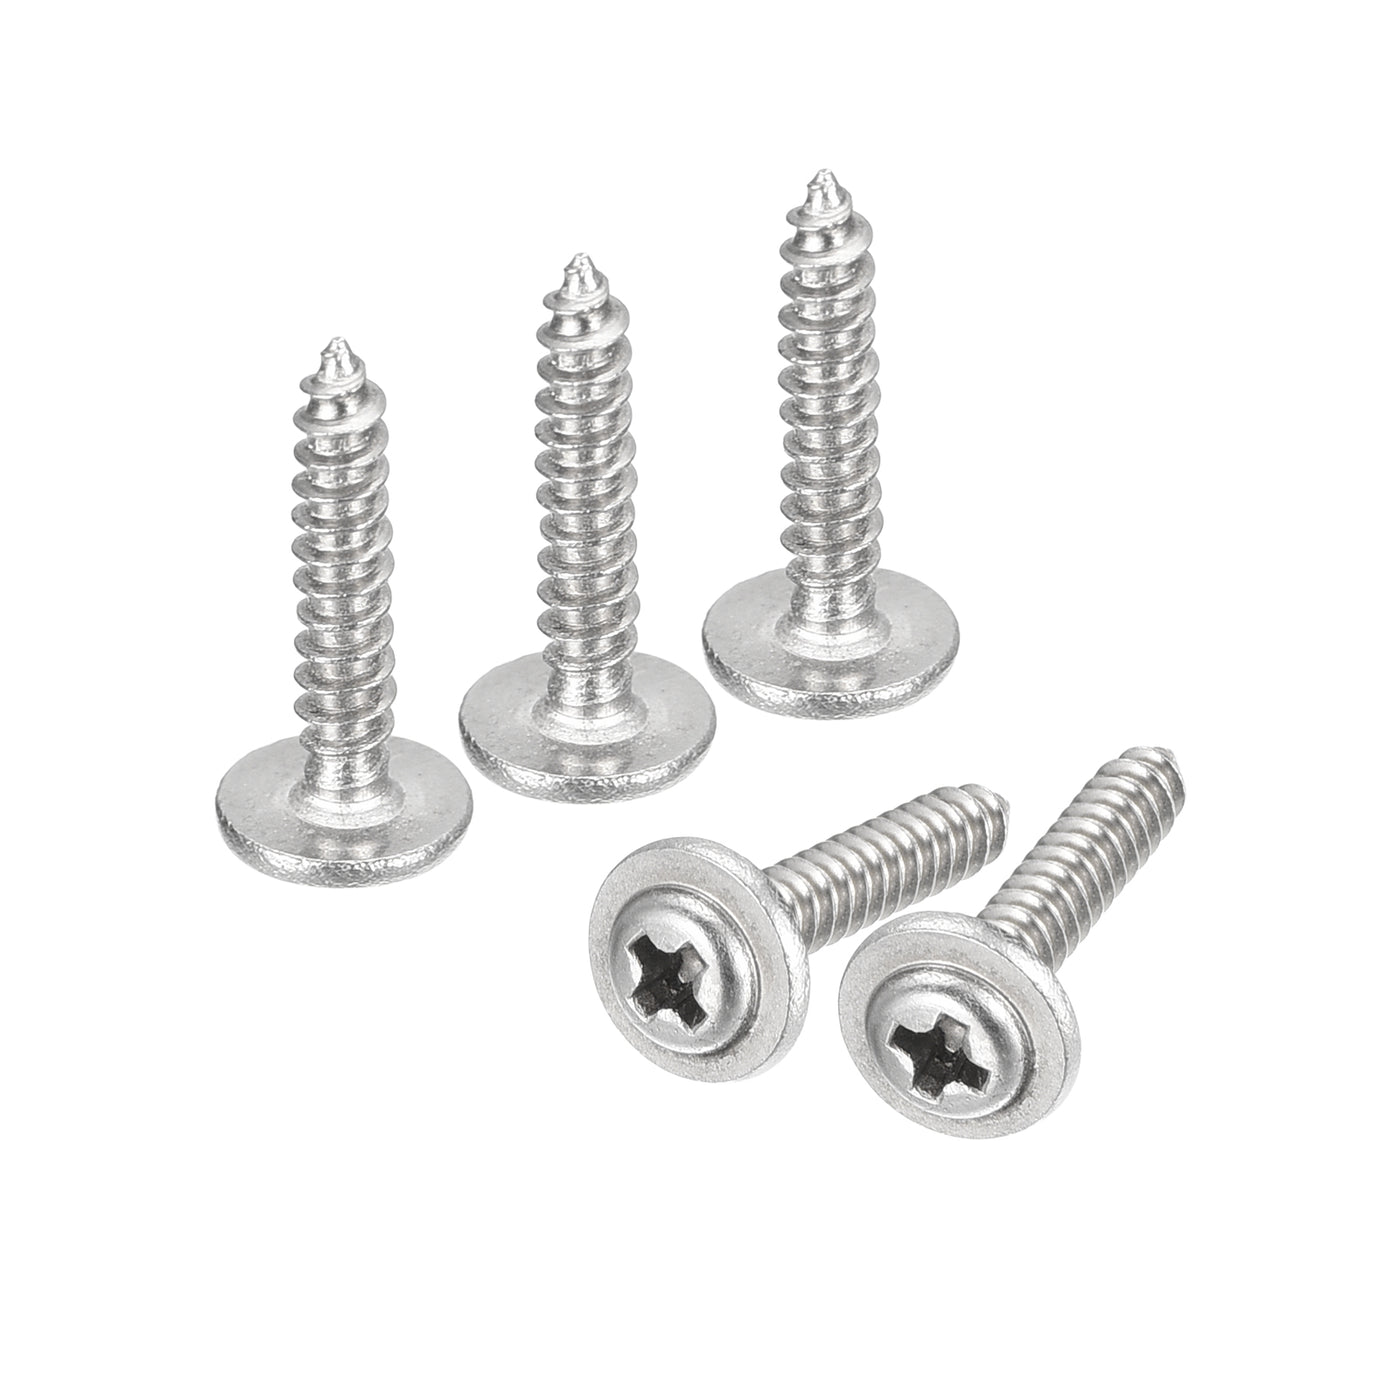 uxcell Uxcell ST2x12mm Phillips Pan Head Self-tapping Screw with Washer, 100pcs - 304 Stainless Steel Wood Screw Full Thread (Silver)